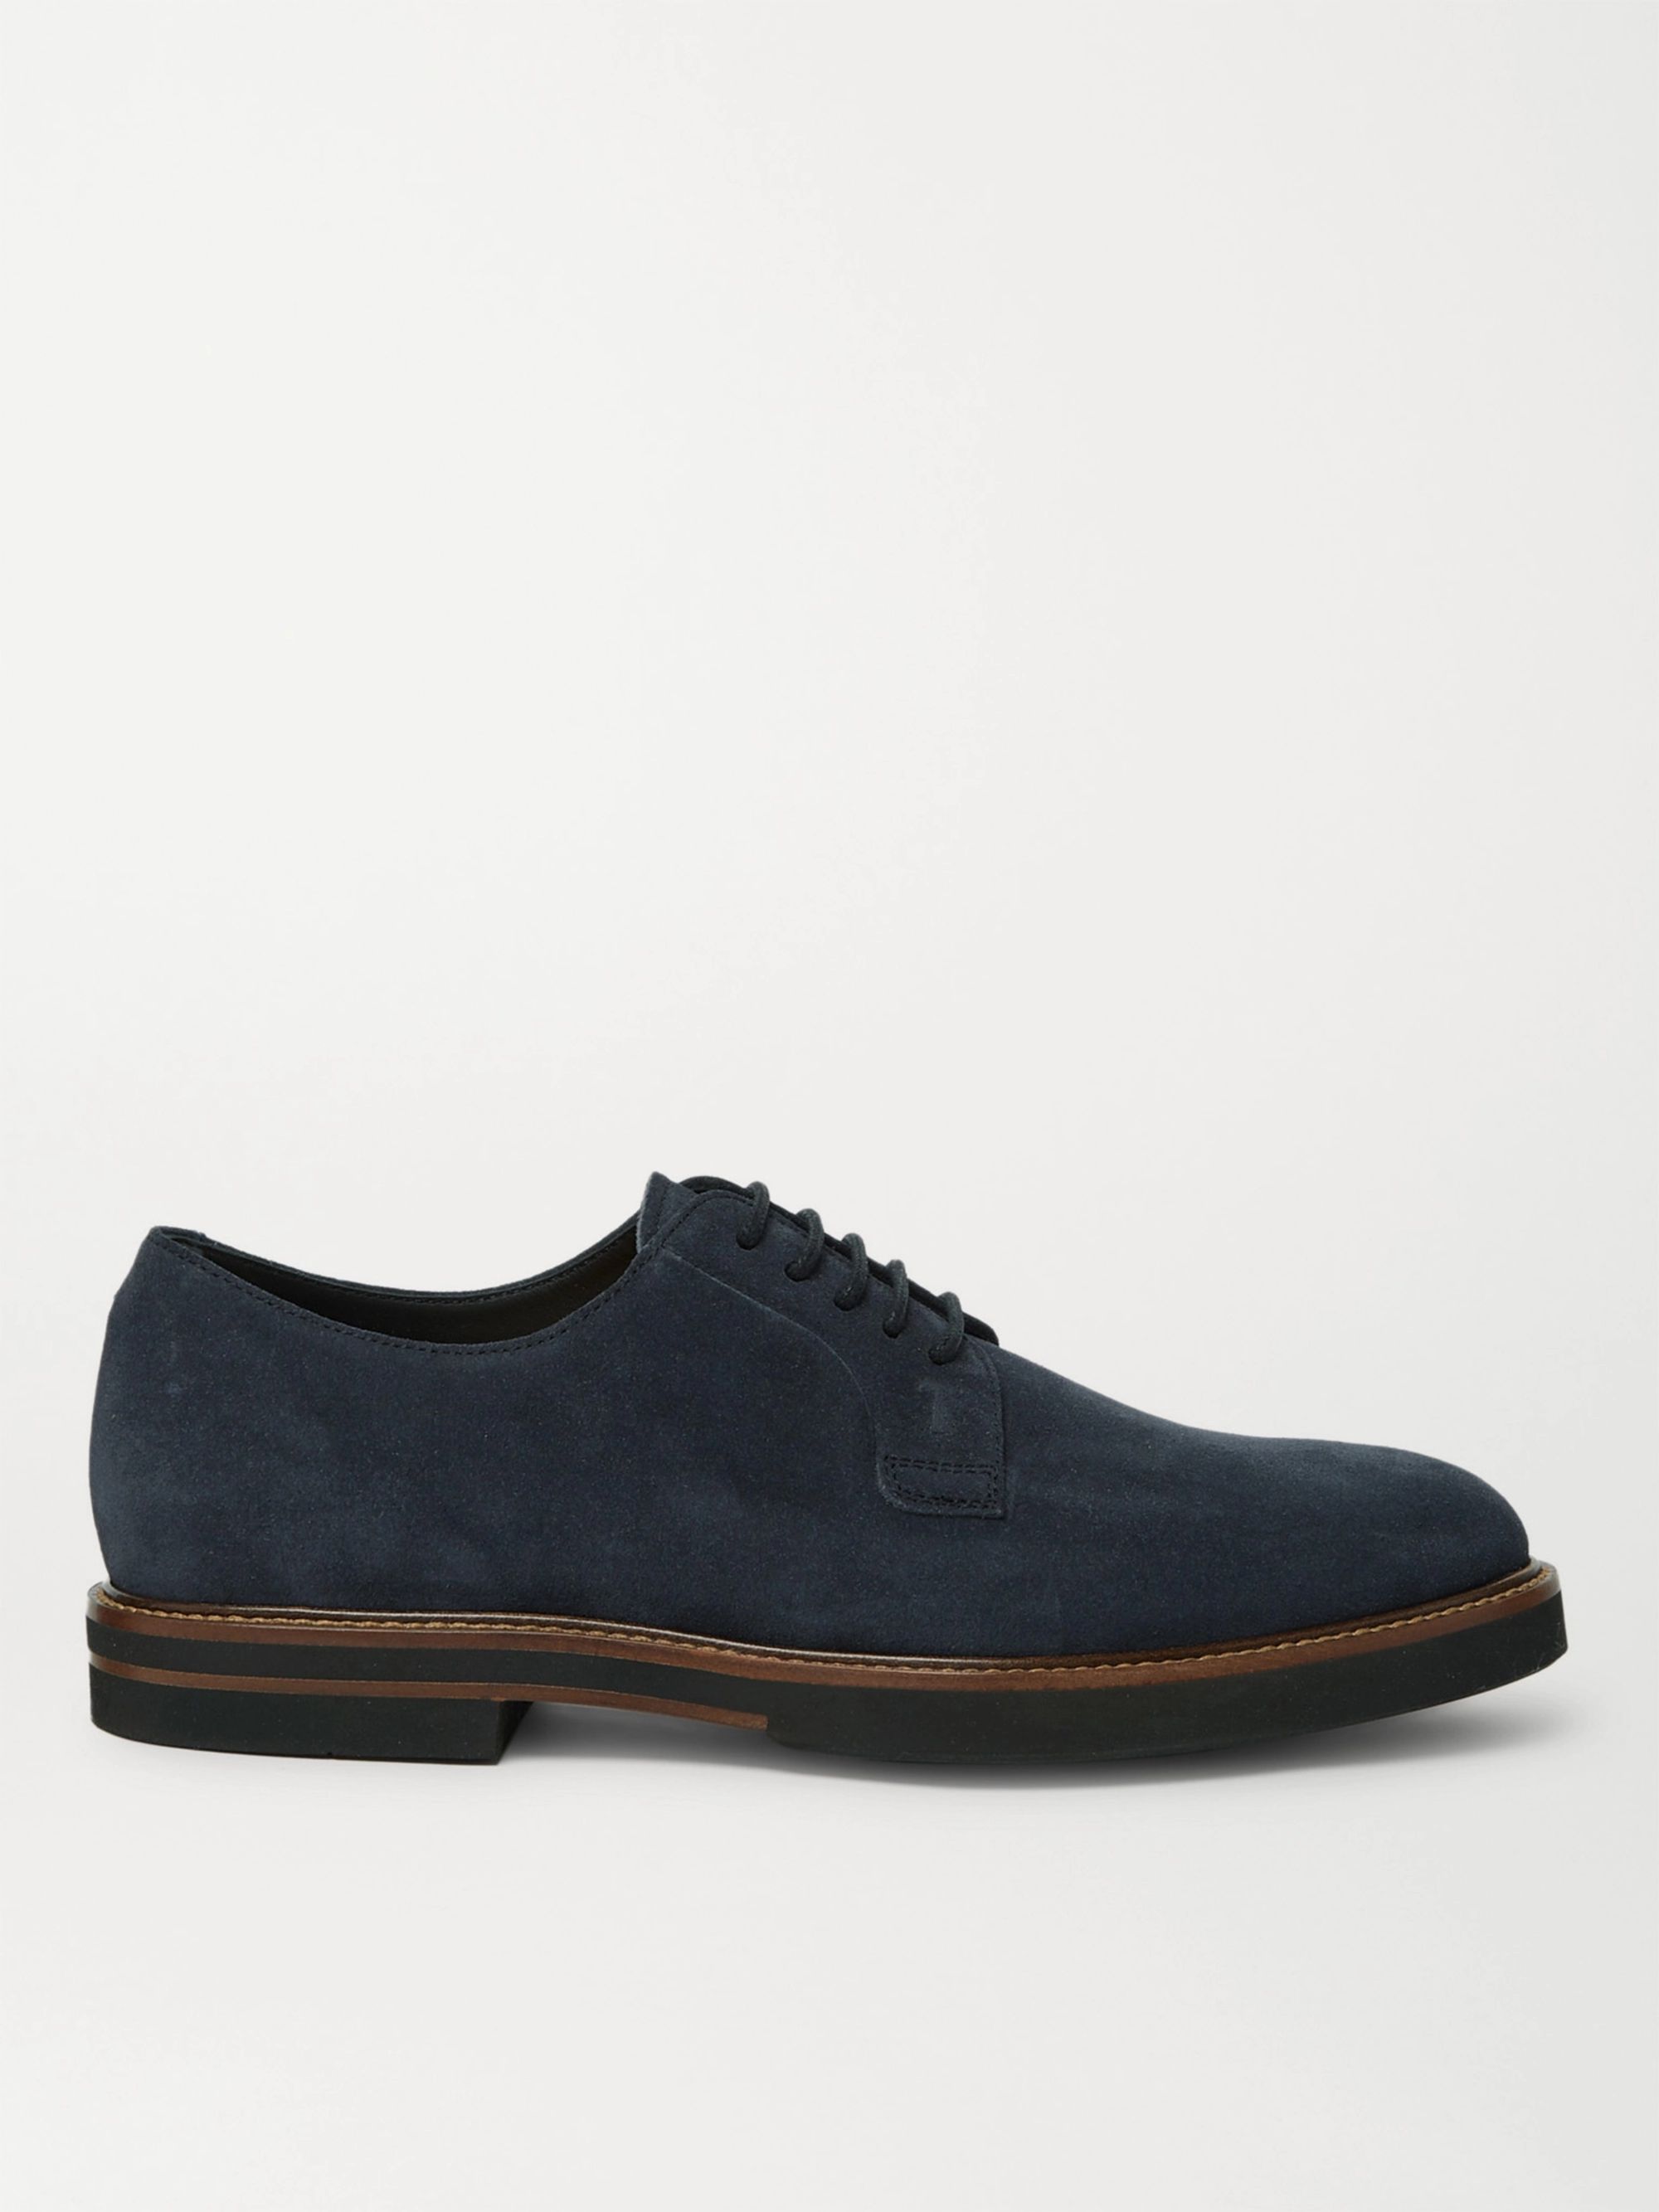 Navy Suede Derby Shoes | Tod's | MR PORTER